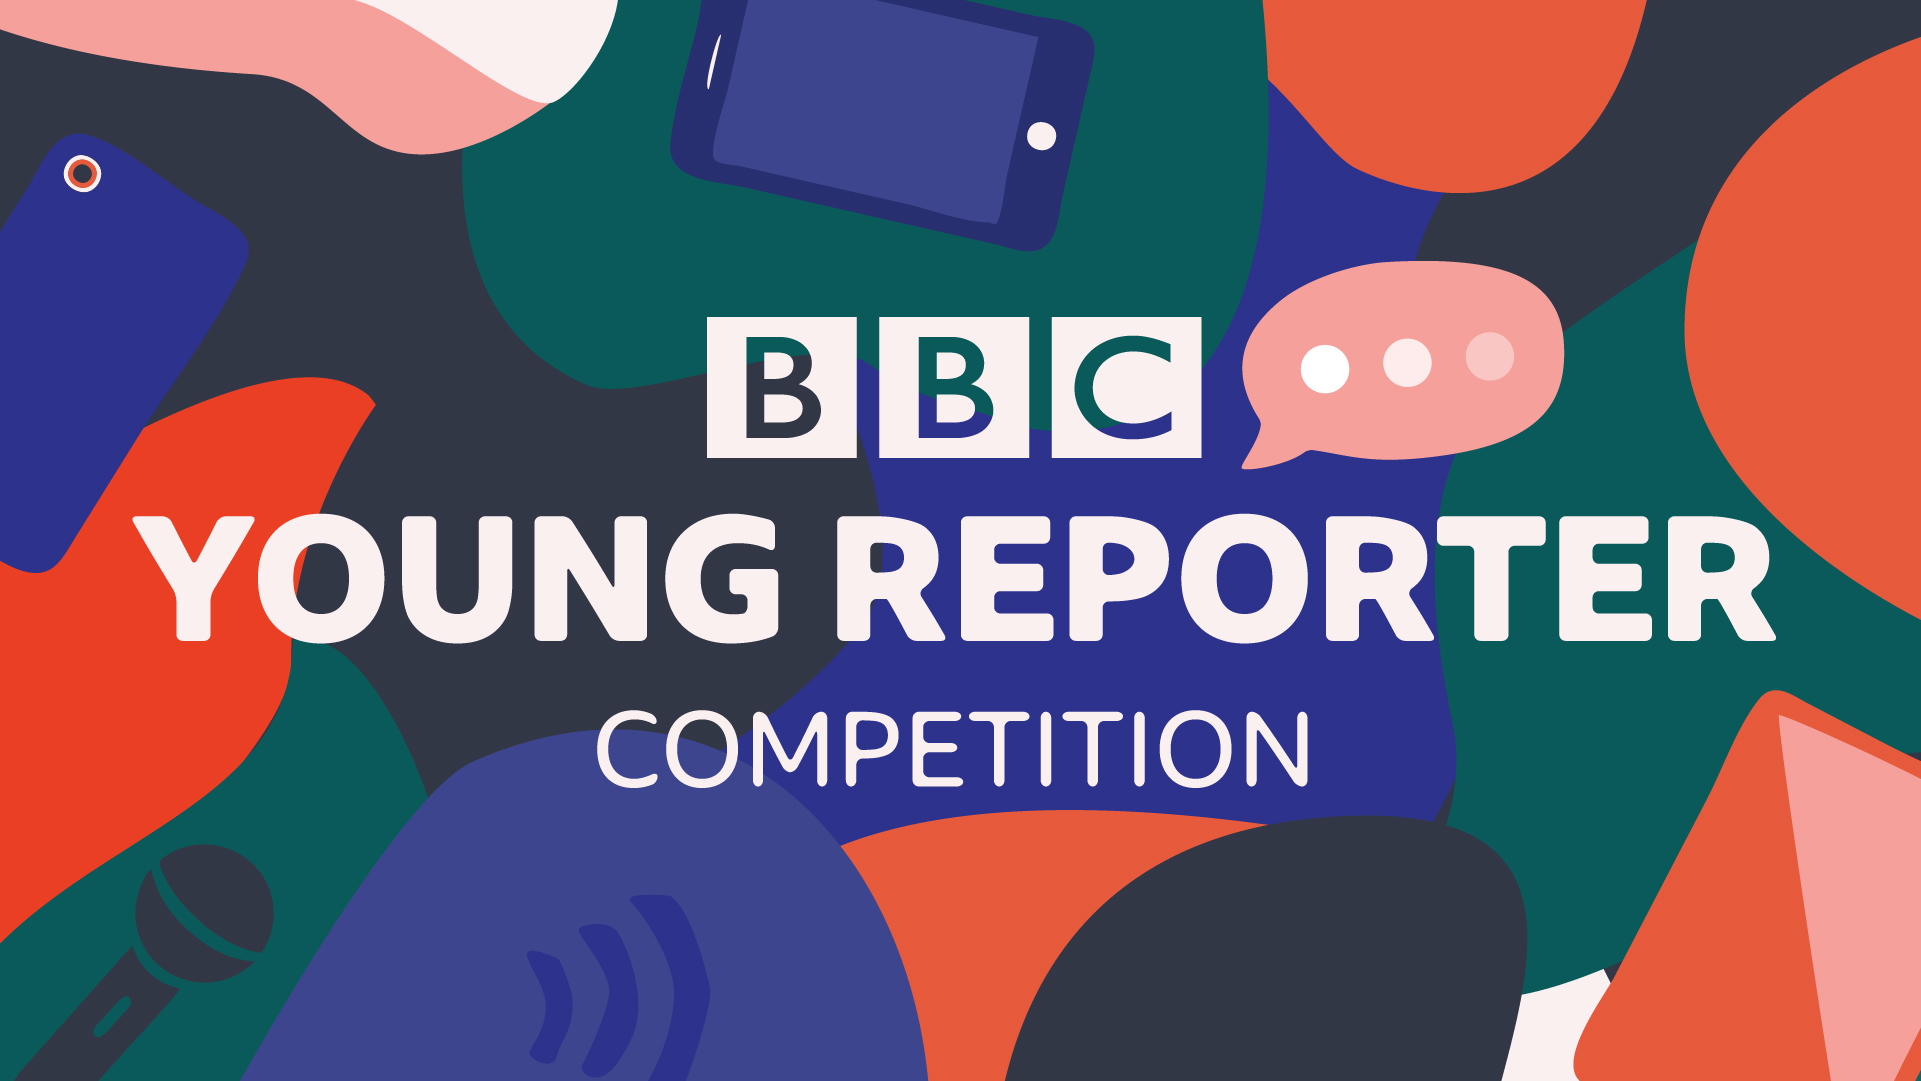 Chanise (2022) works on BBC Young Reporter Competition